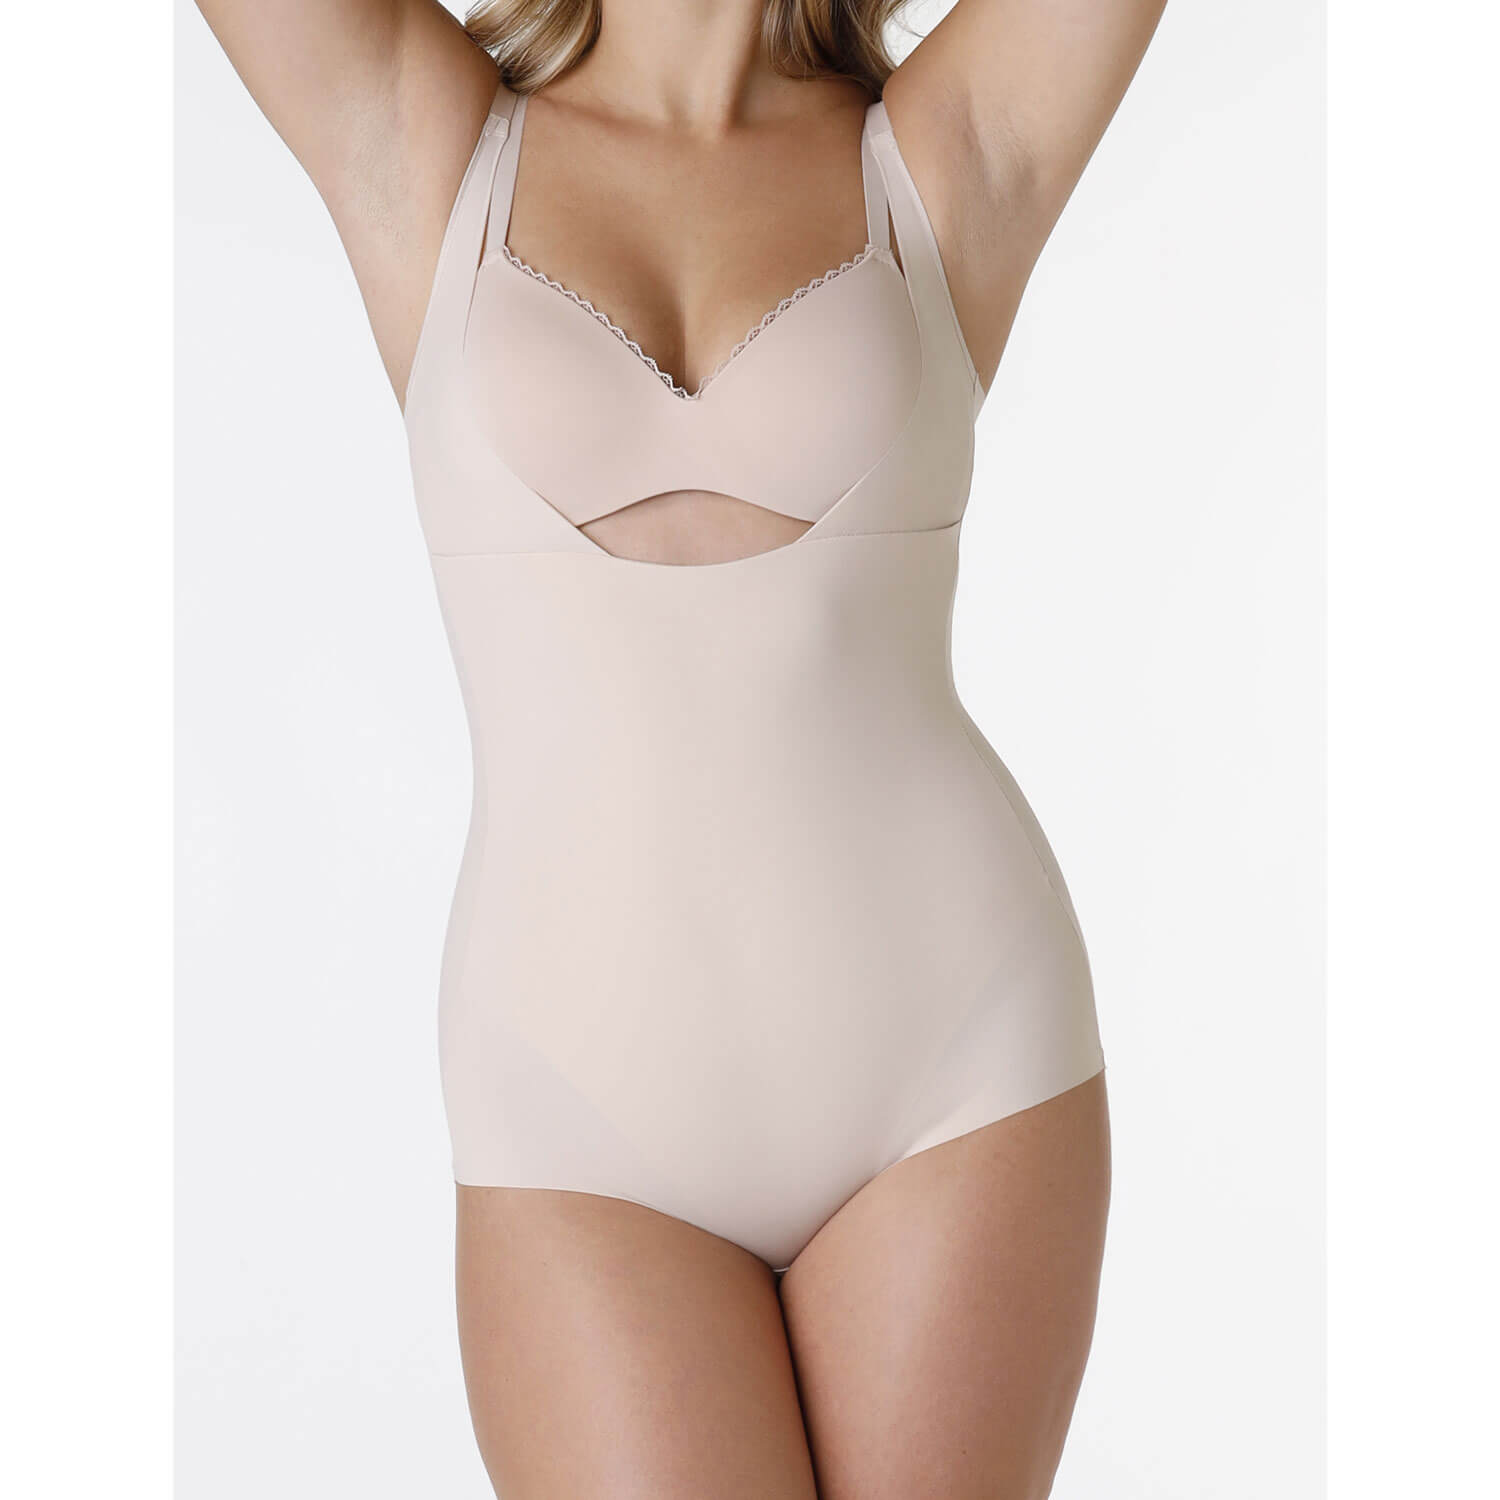 Maidenform Sleek Smoothers Bodybriefer - Nude 1 Shaws Department Stores